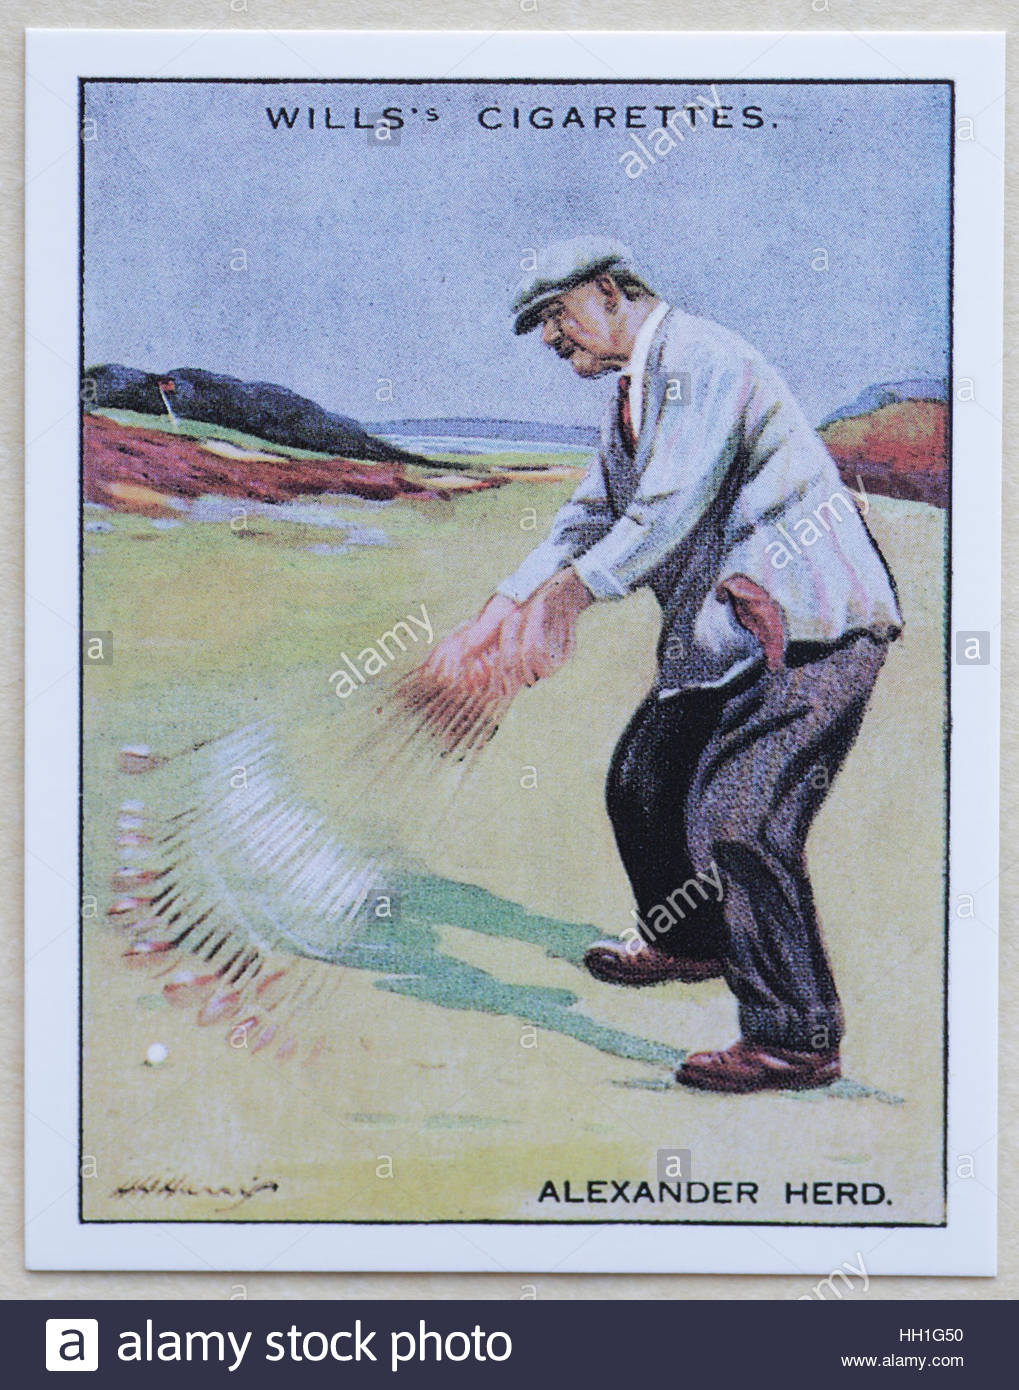 Alexander Herd - Famous Golfers, cigarette cards issued in 1930 by W.D.& H.O. Wills cigarettes. Stock Photo